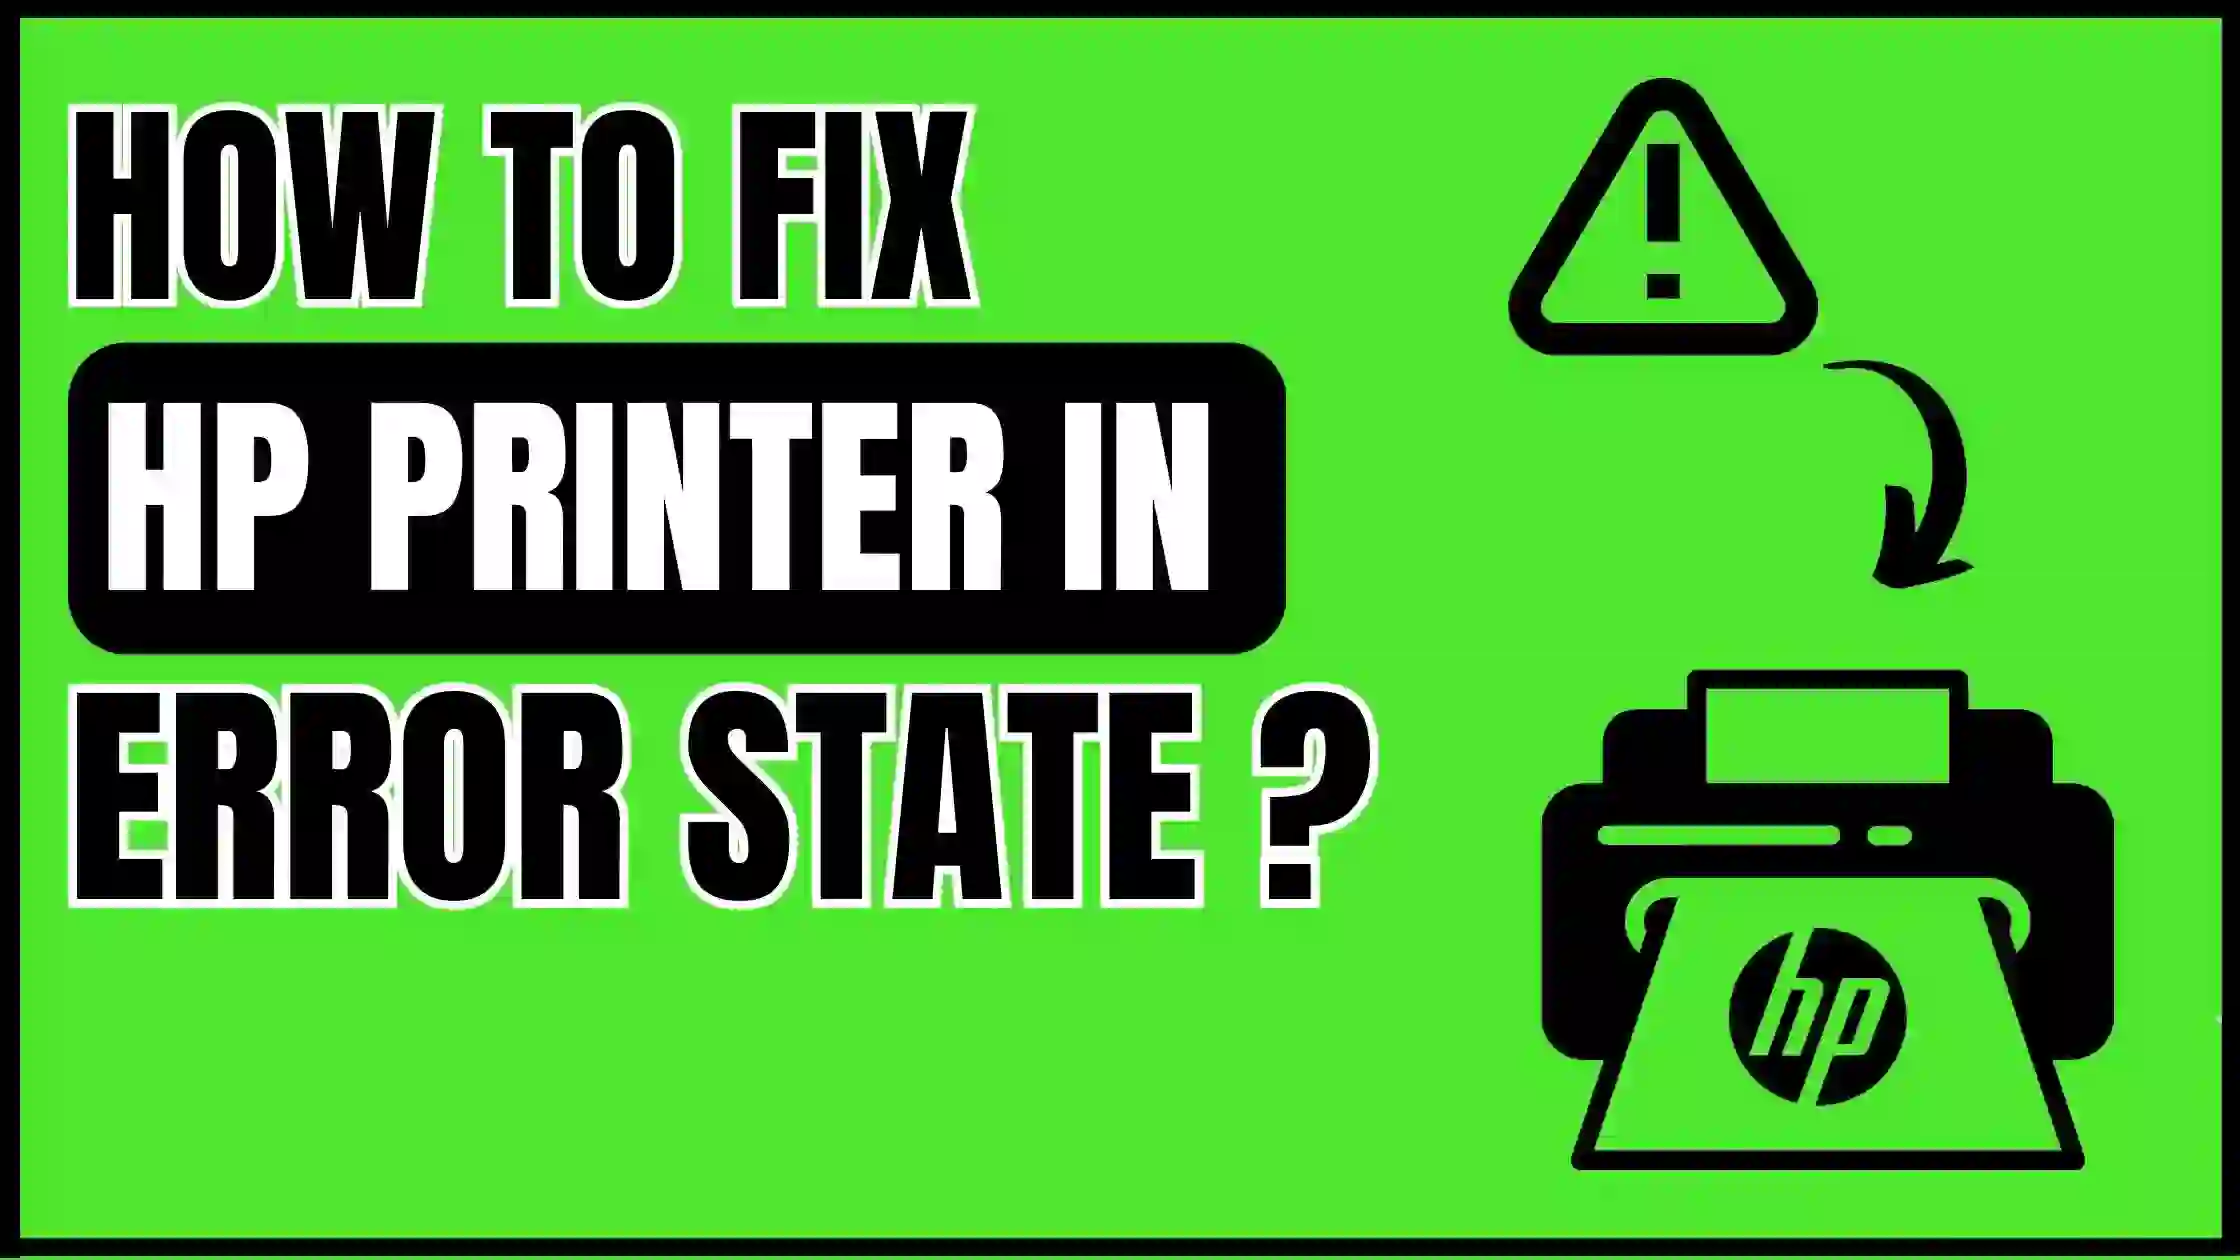 HOW TO FIX HP PRINTER IN ERROR STATE